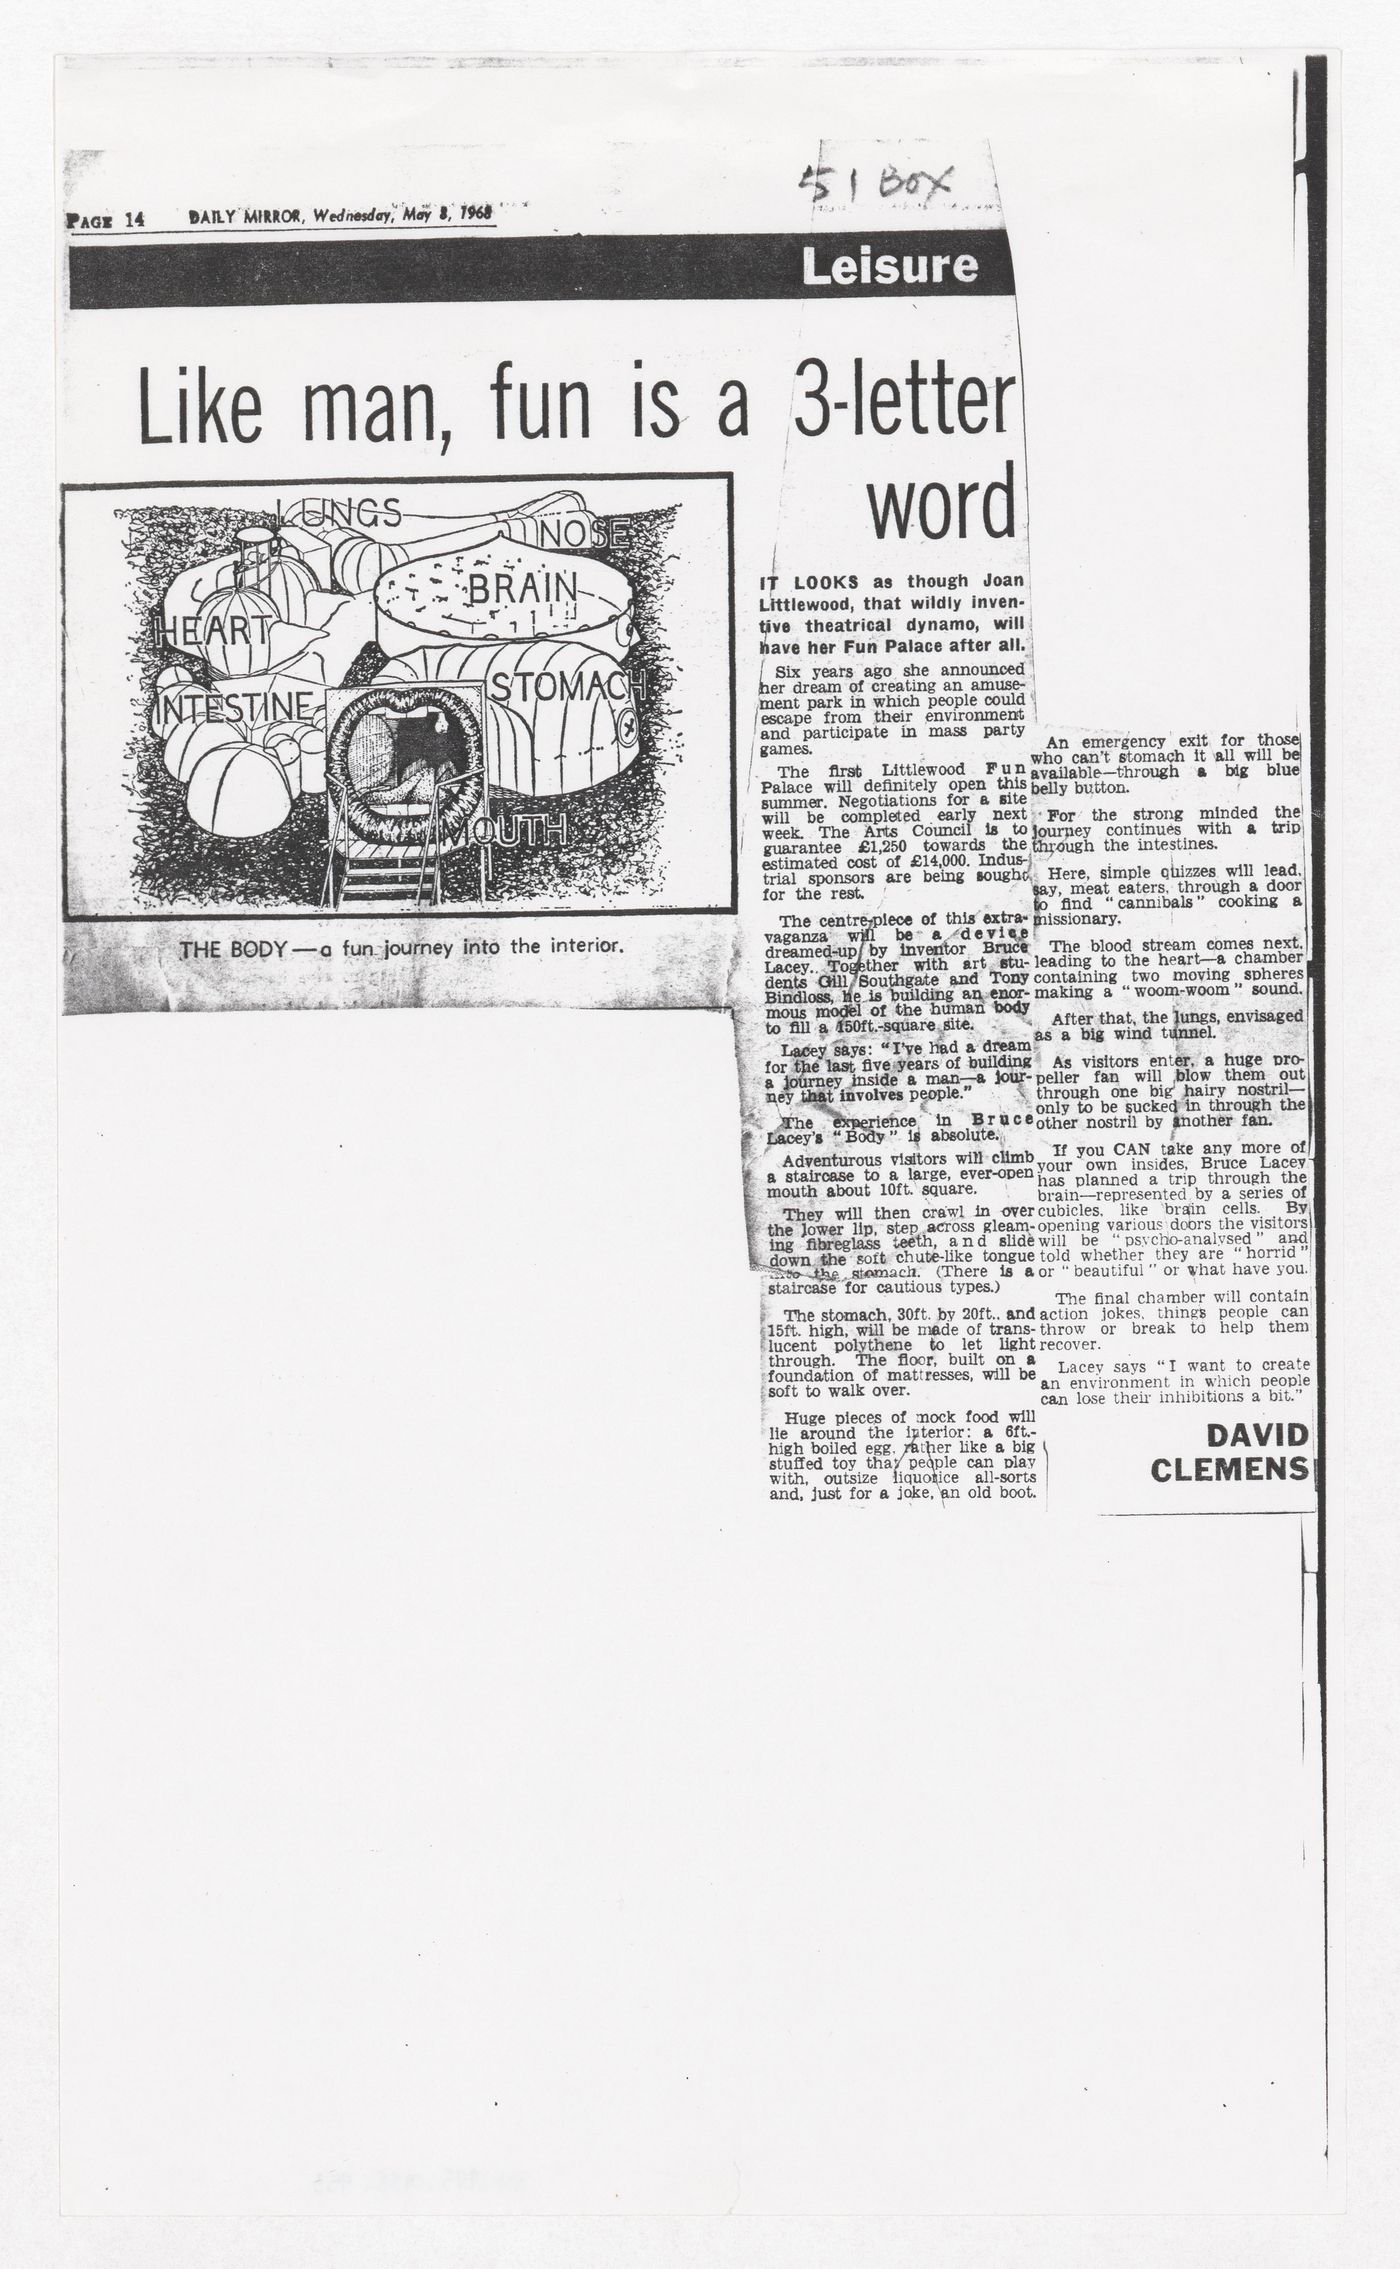 Copy of the article "Like man, fun is a 3-letter word", Daily Mirror, 8 May 1968